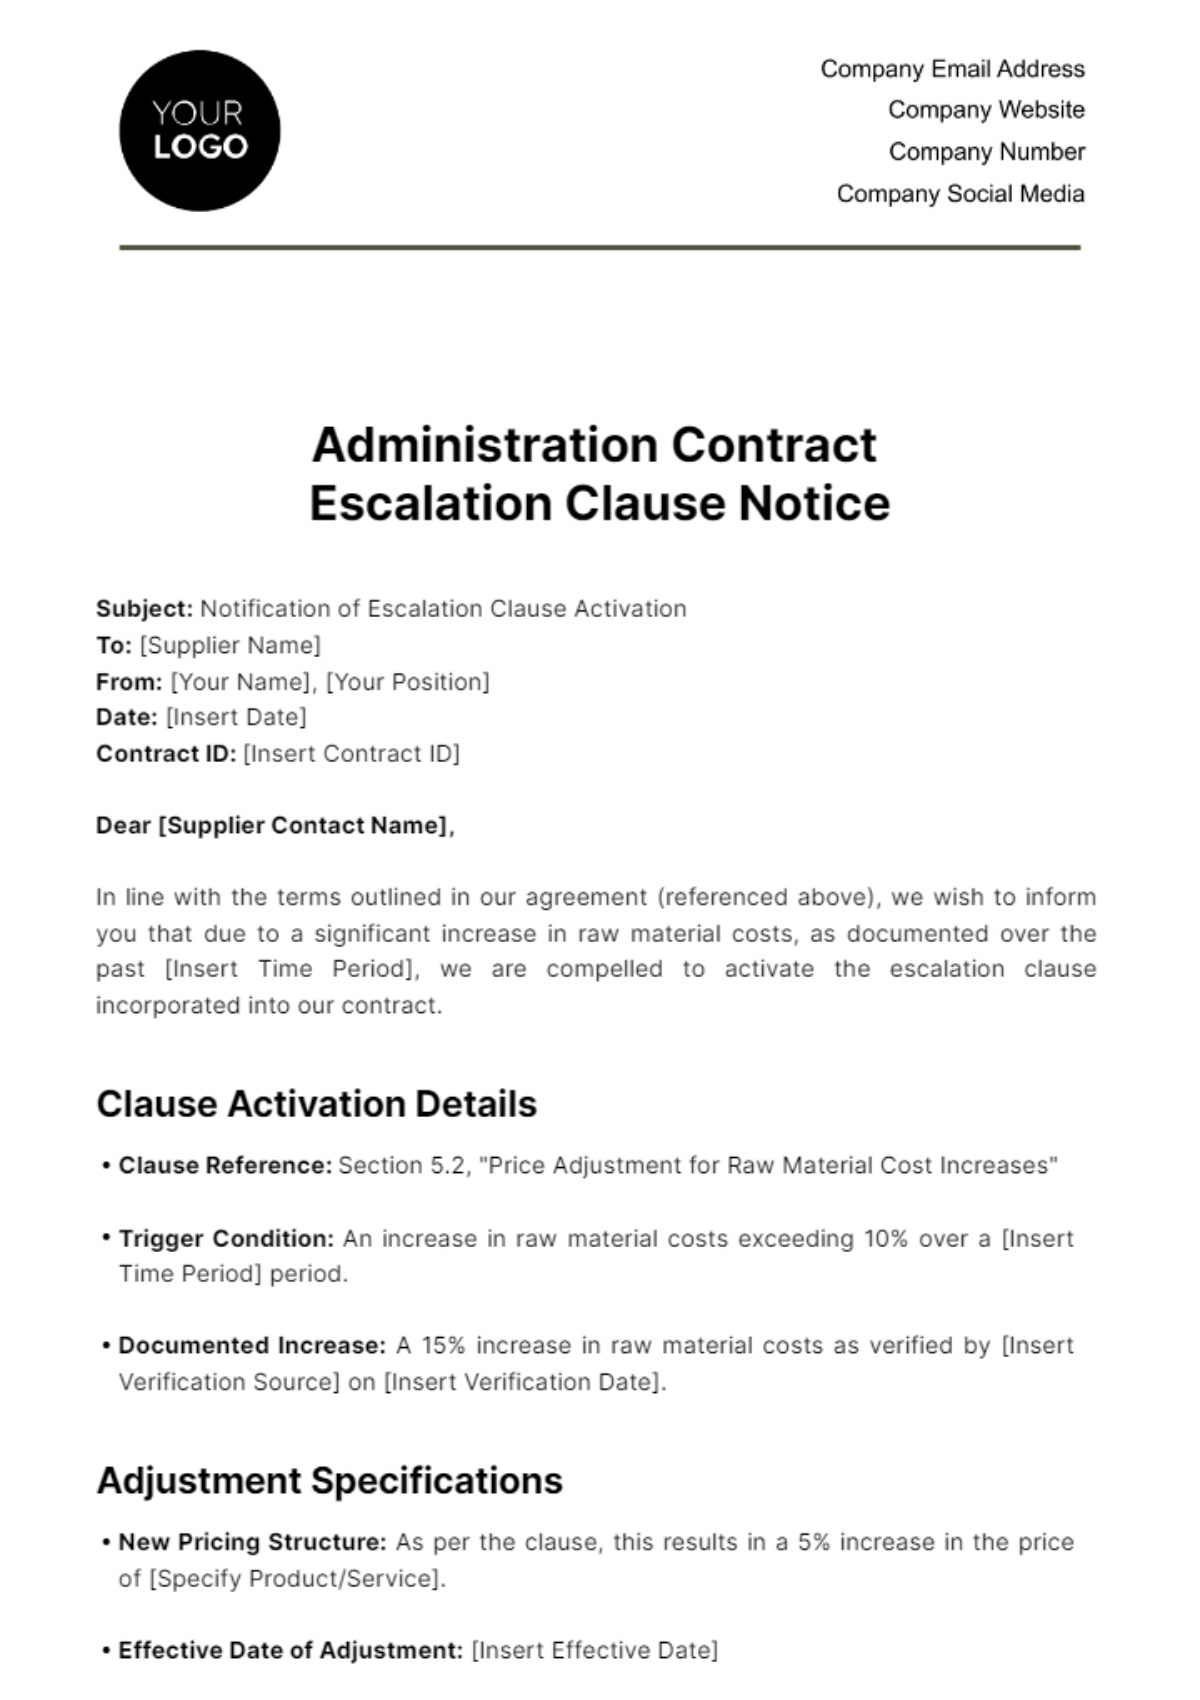 Administration Contract Escalation Clause Notice Template